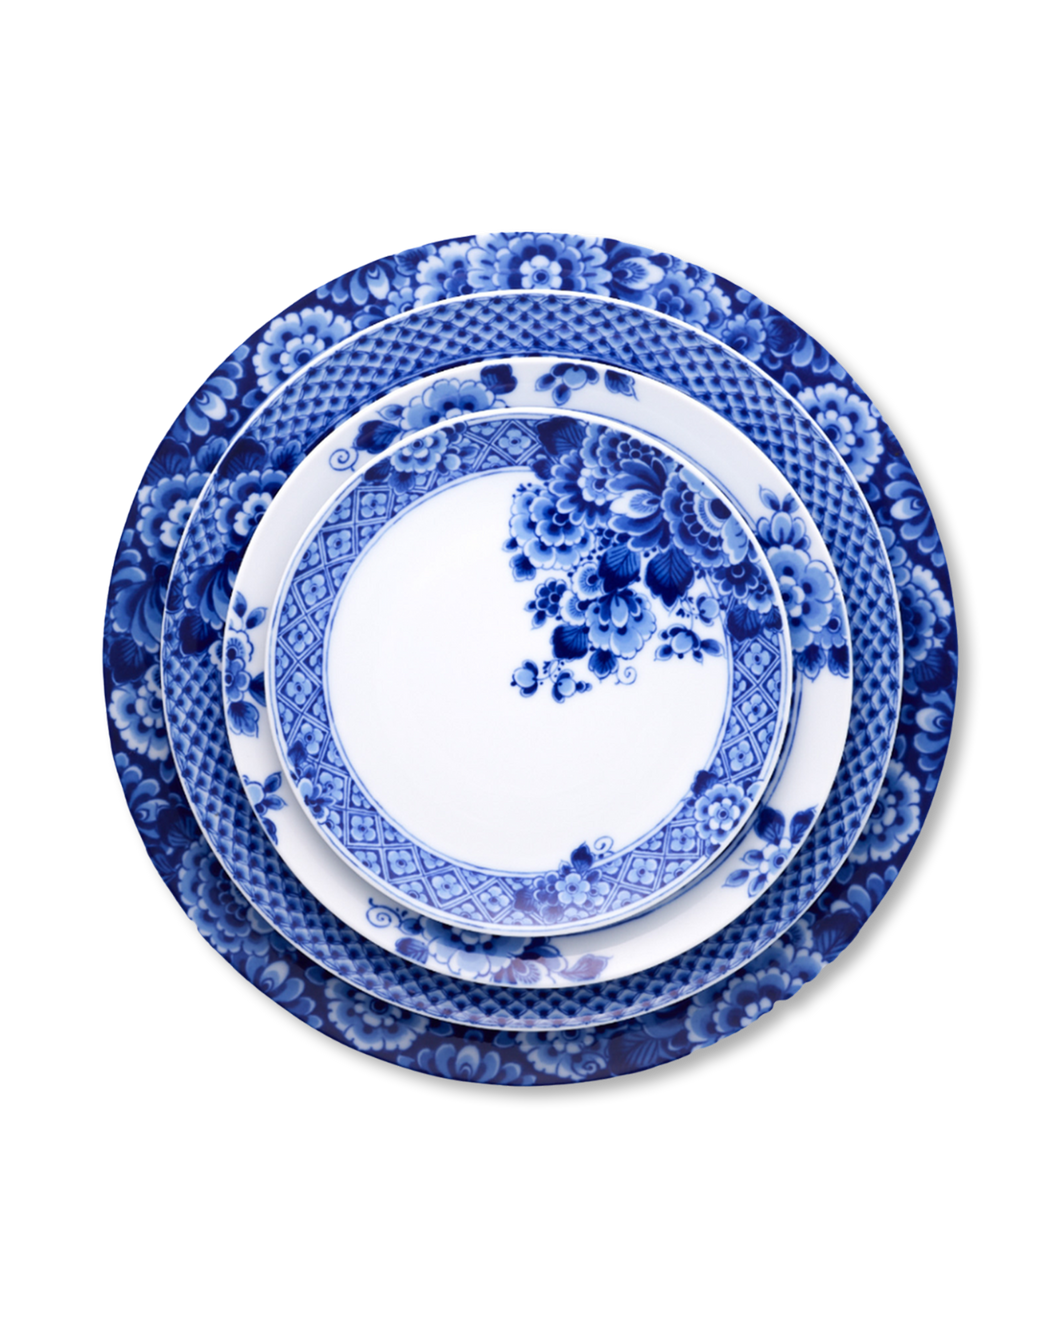 Blue and White Fine Porcelain Dinnerware Set Available for Rent Wedding Registry and Purchase